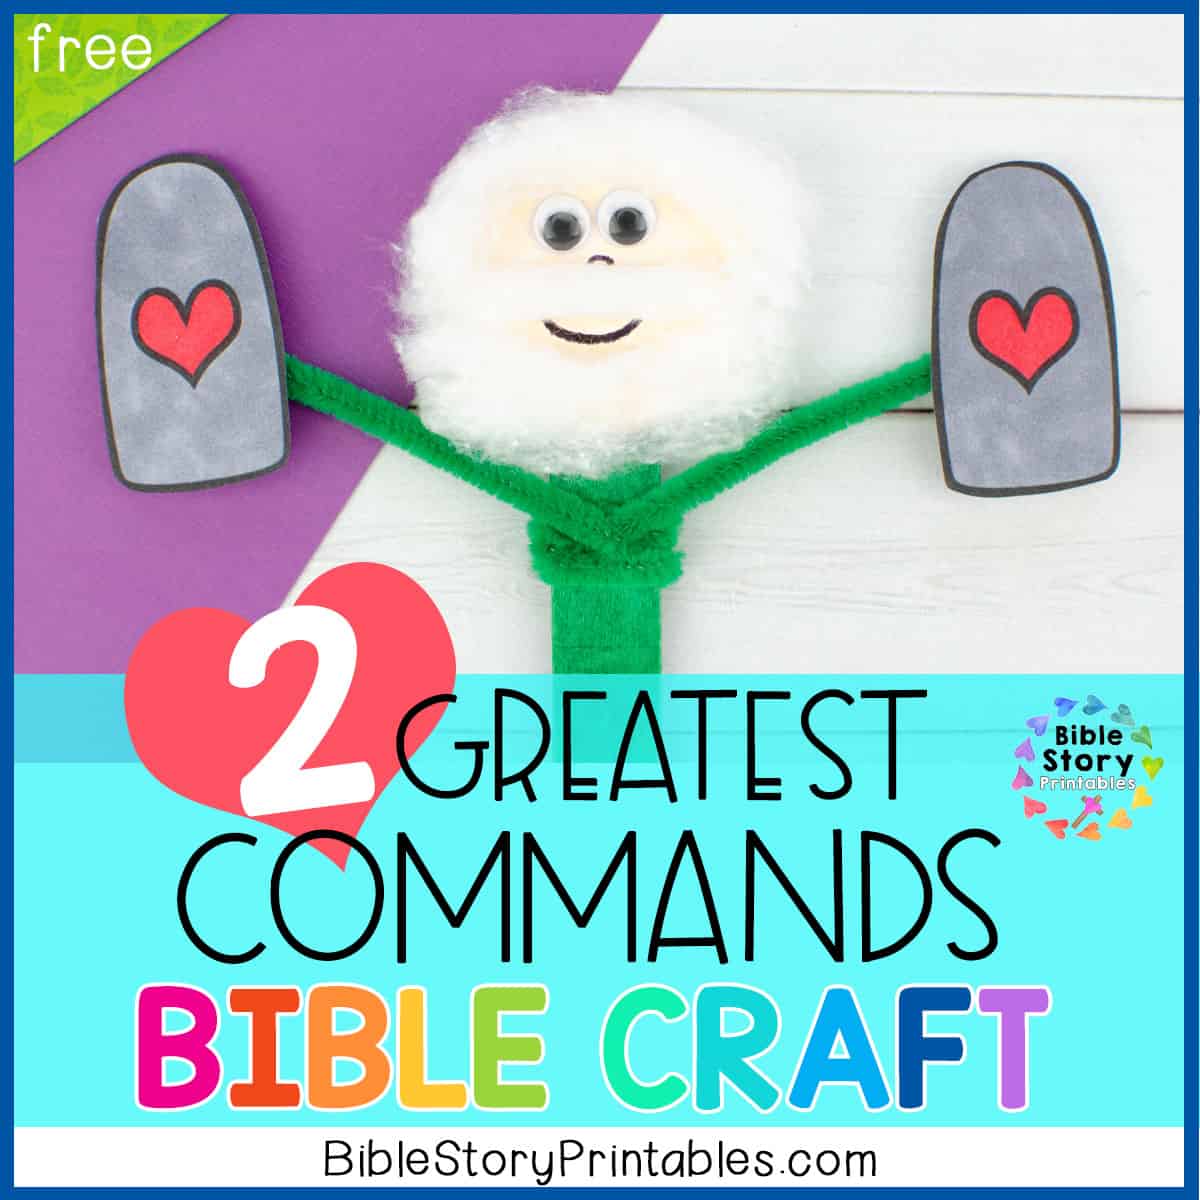 two-greatest-commandments-craft-for-kids-bible-story-printables